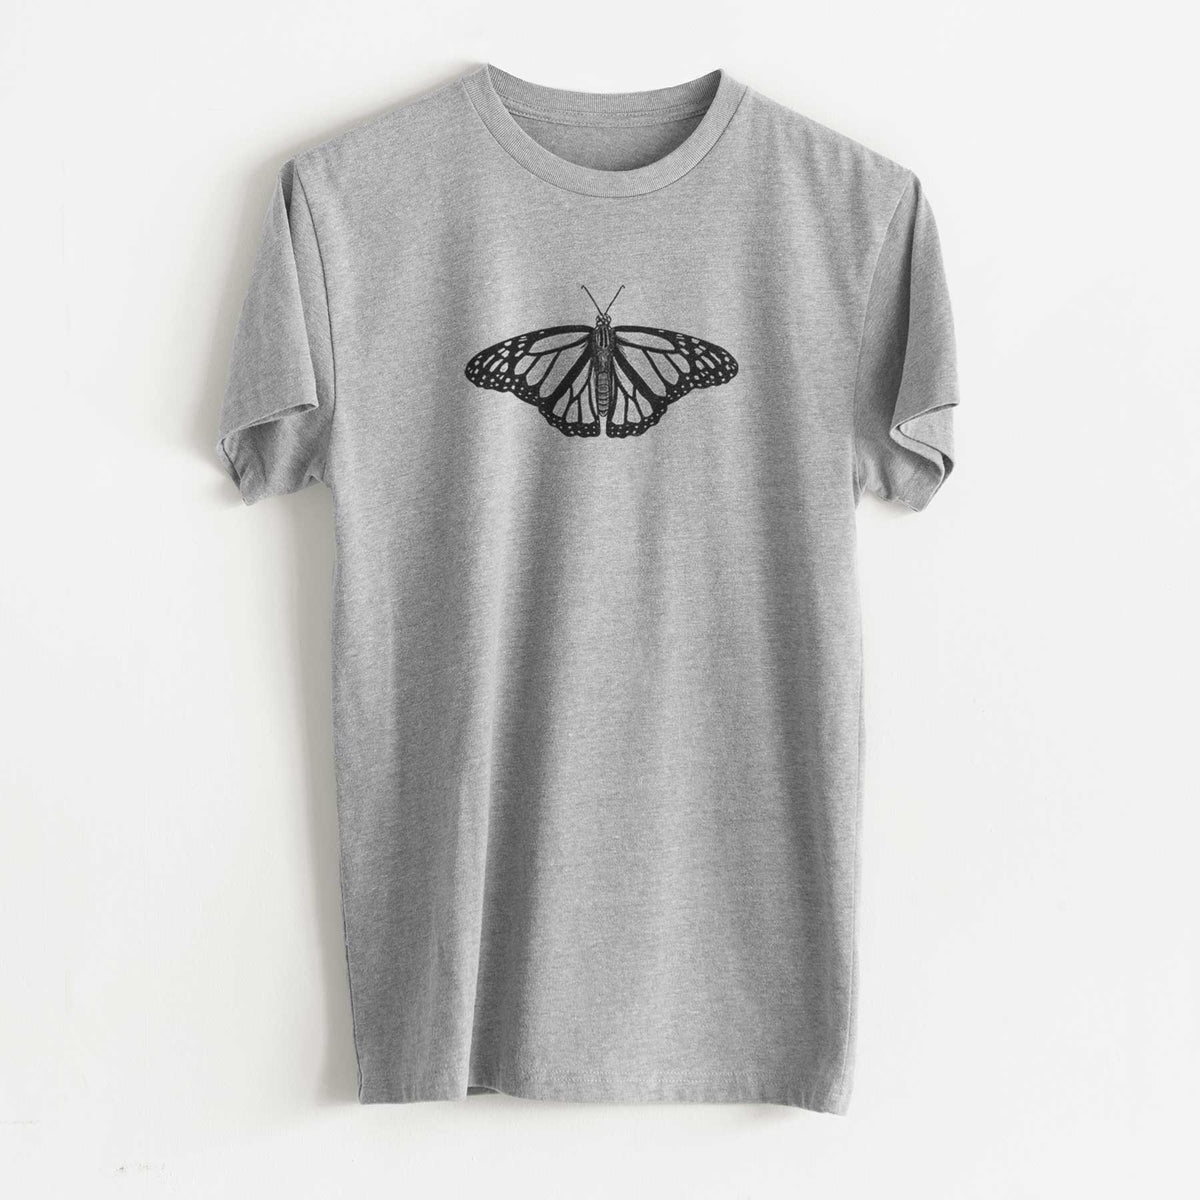 Danaus plexippus - Monarch Butterfly - Unisex Recycled Eco Tee  - CLOSEOUT - FINAL SALE